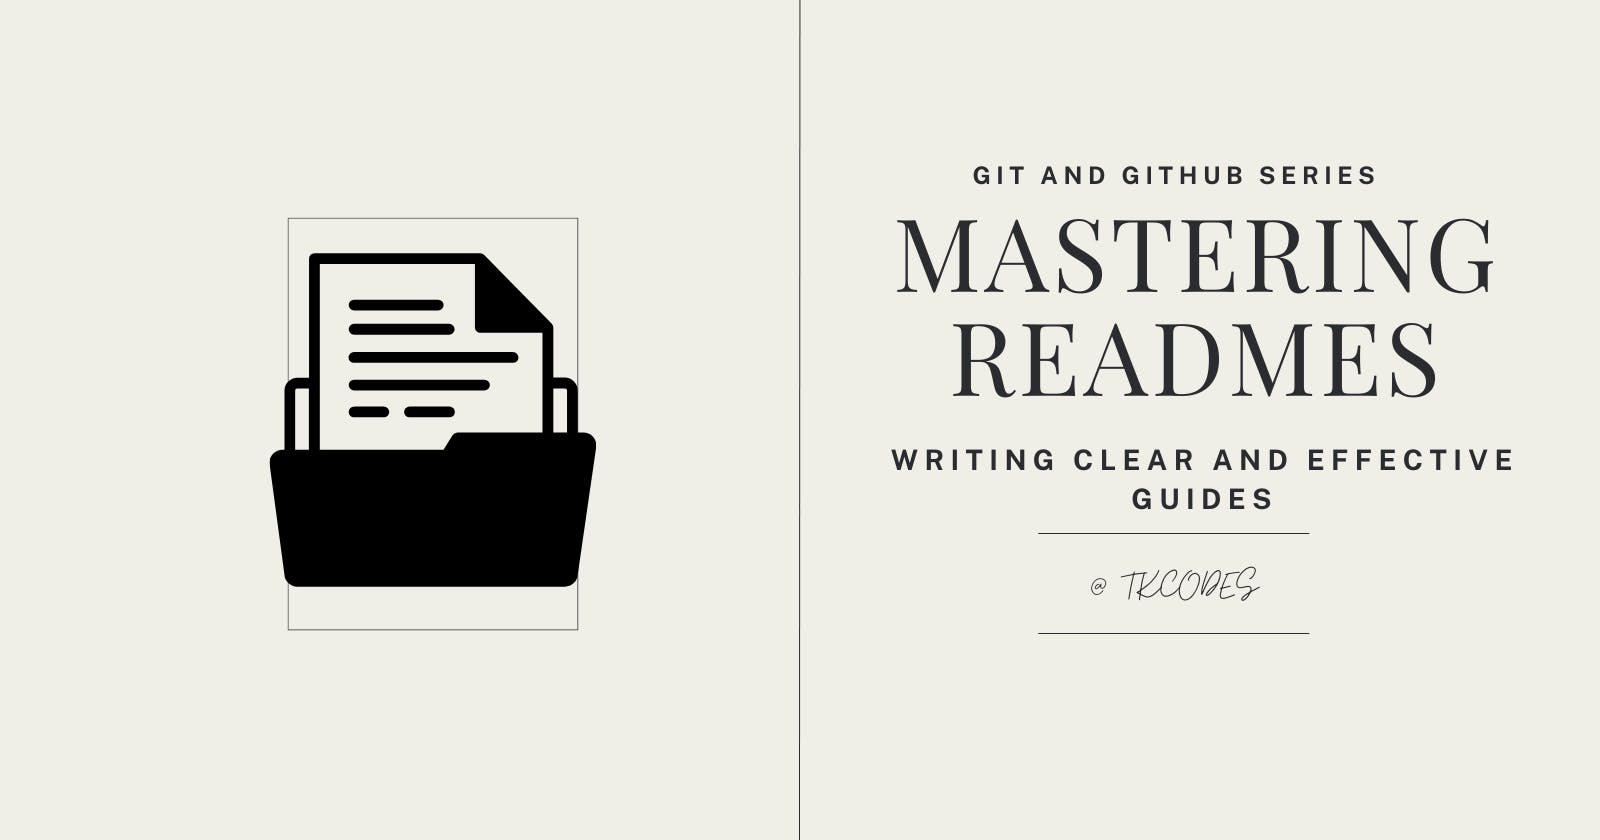 Mastering READMEs: Writing Clear and Effective Guides